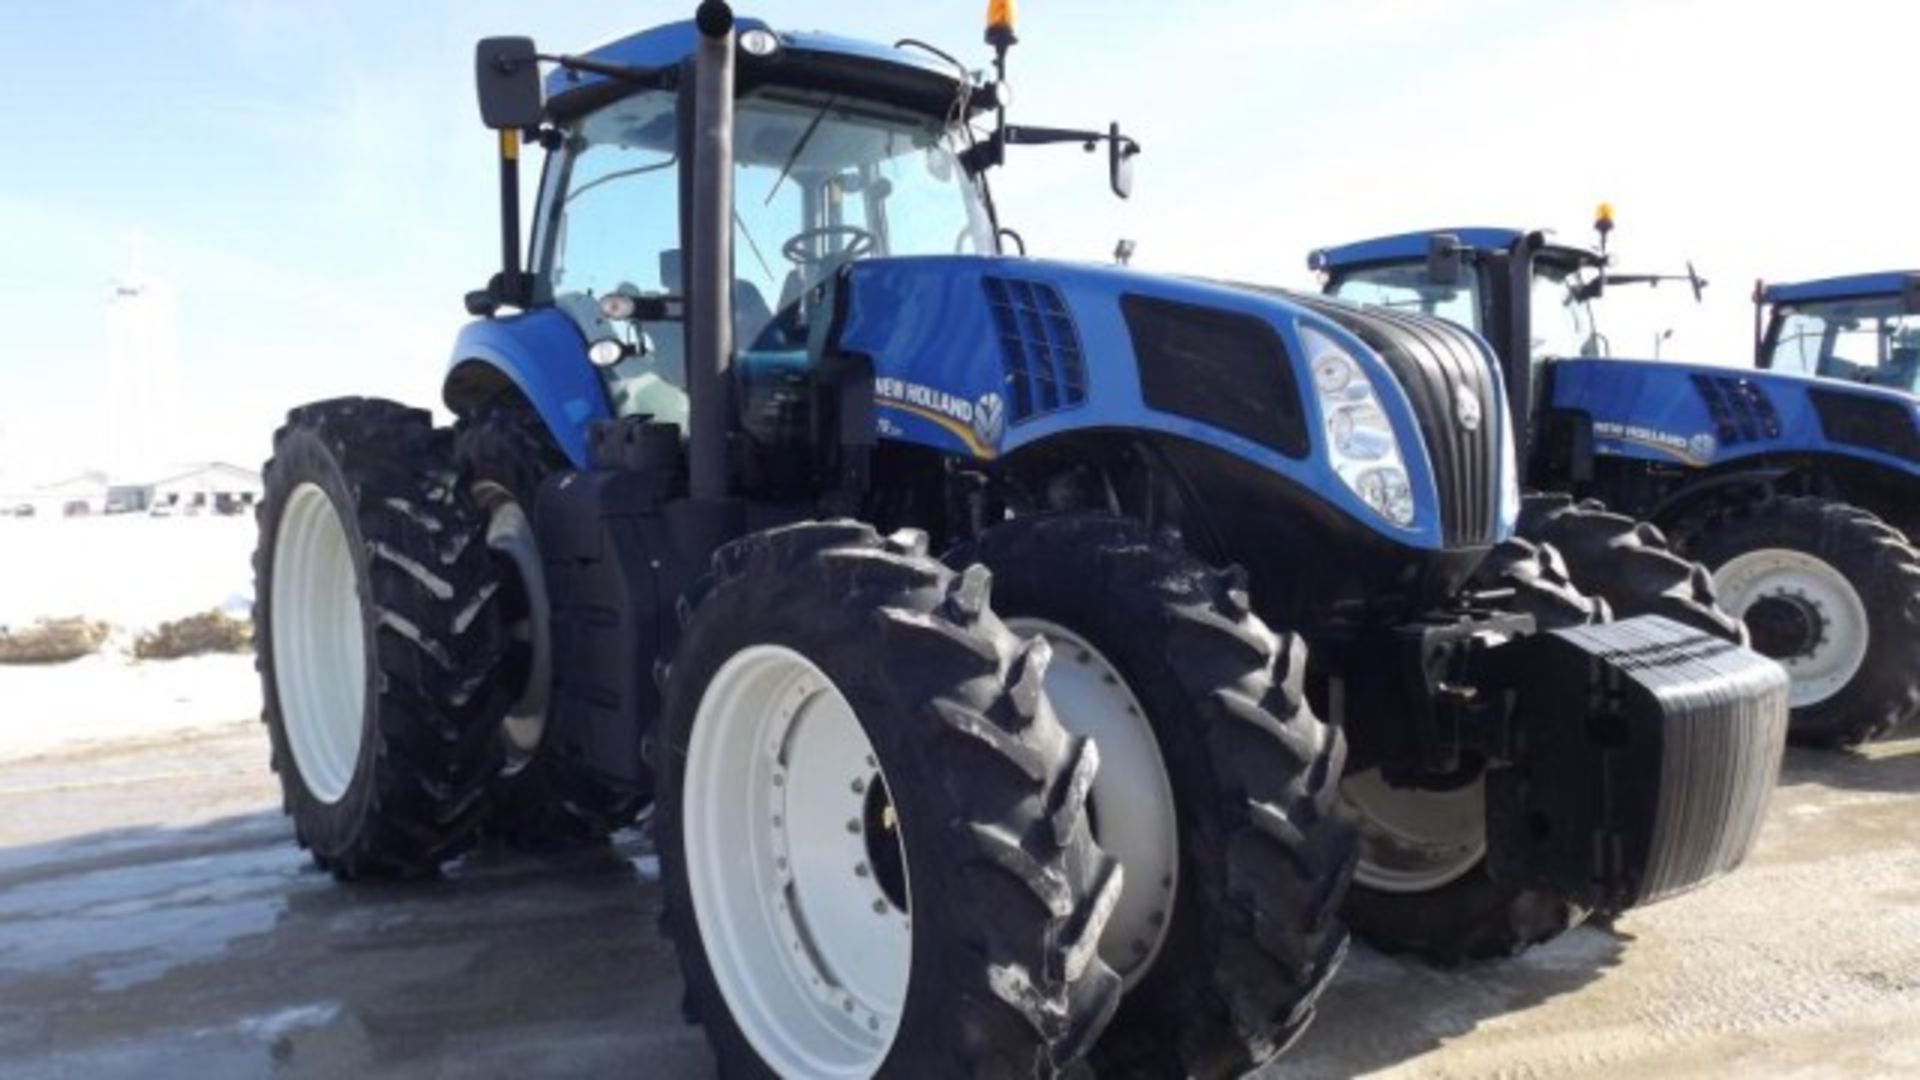 New Holland T8.330 Tractor '12, sn#ZBRC08592 1192 Hrs, MFWD, Deluxe Cab, Buddy Seat, 280 HP, 18/4 - Image 2 of 19